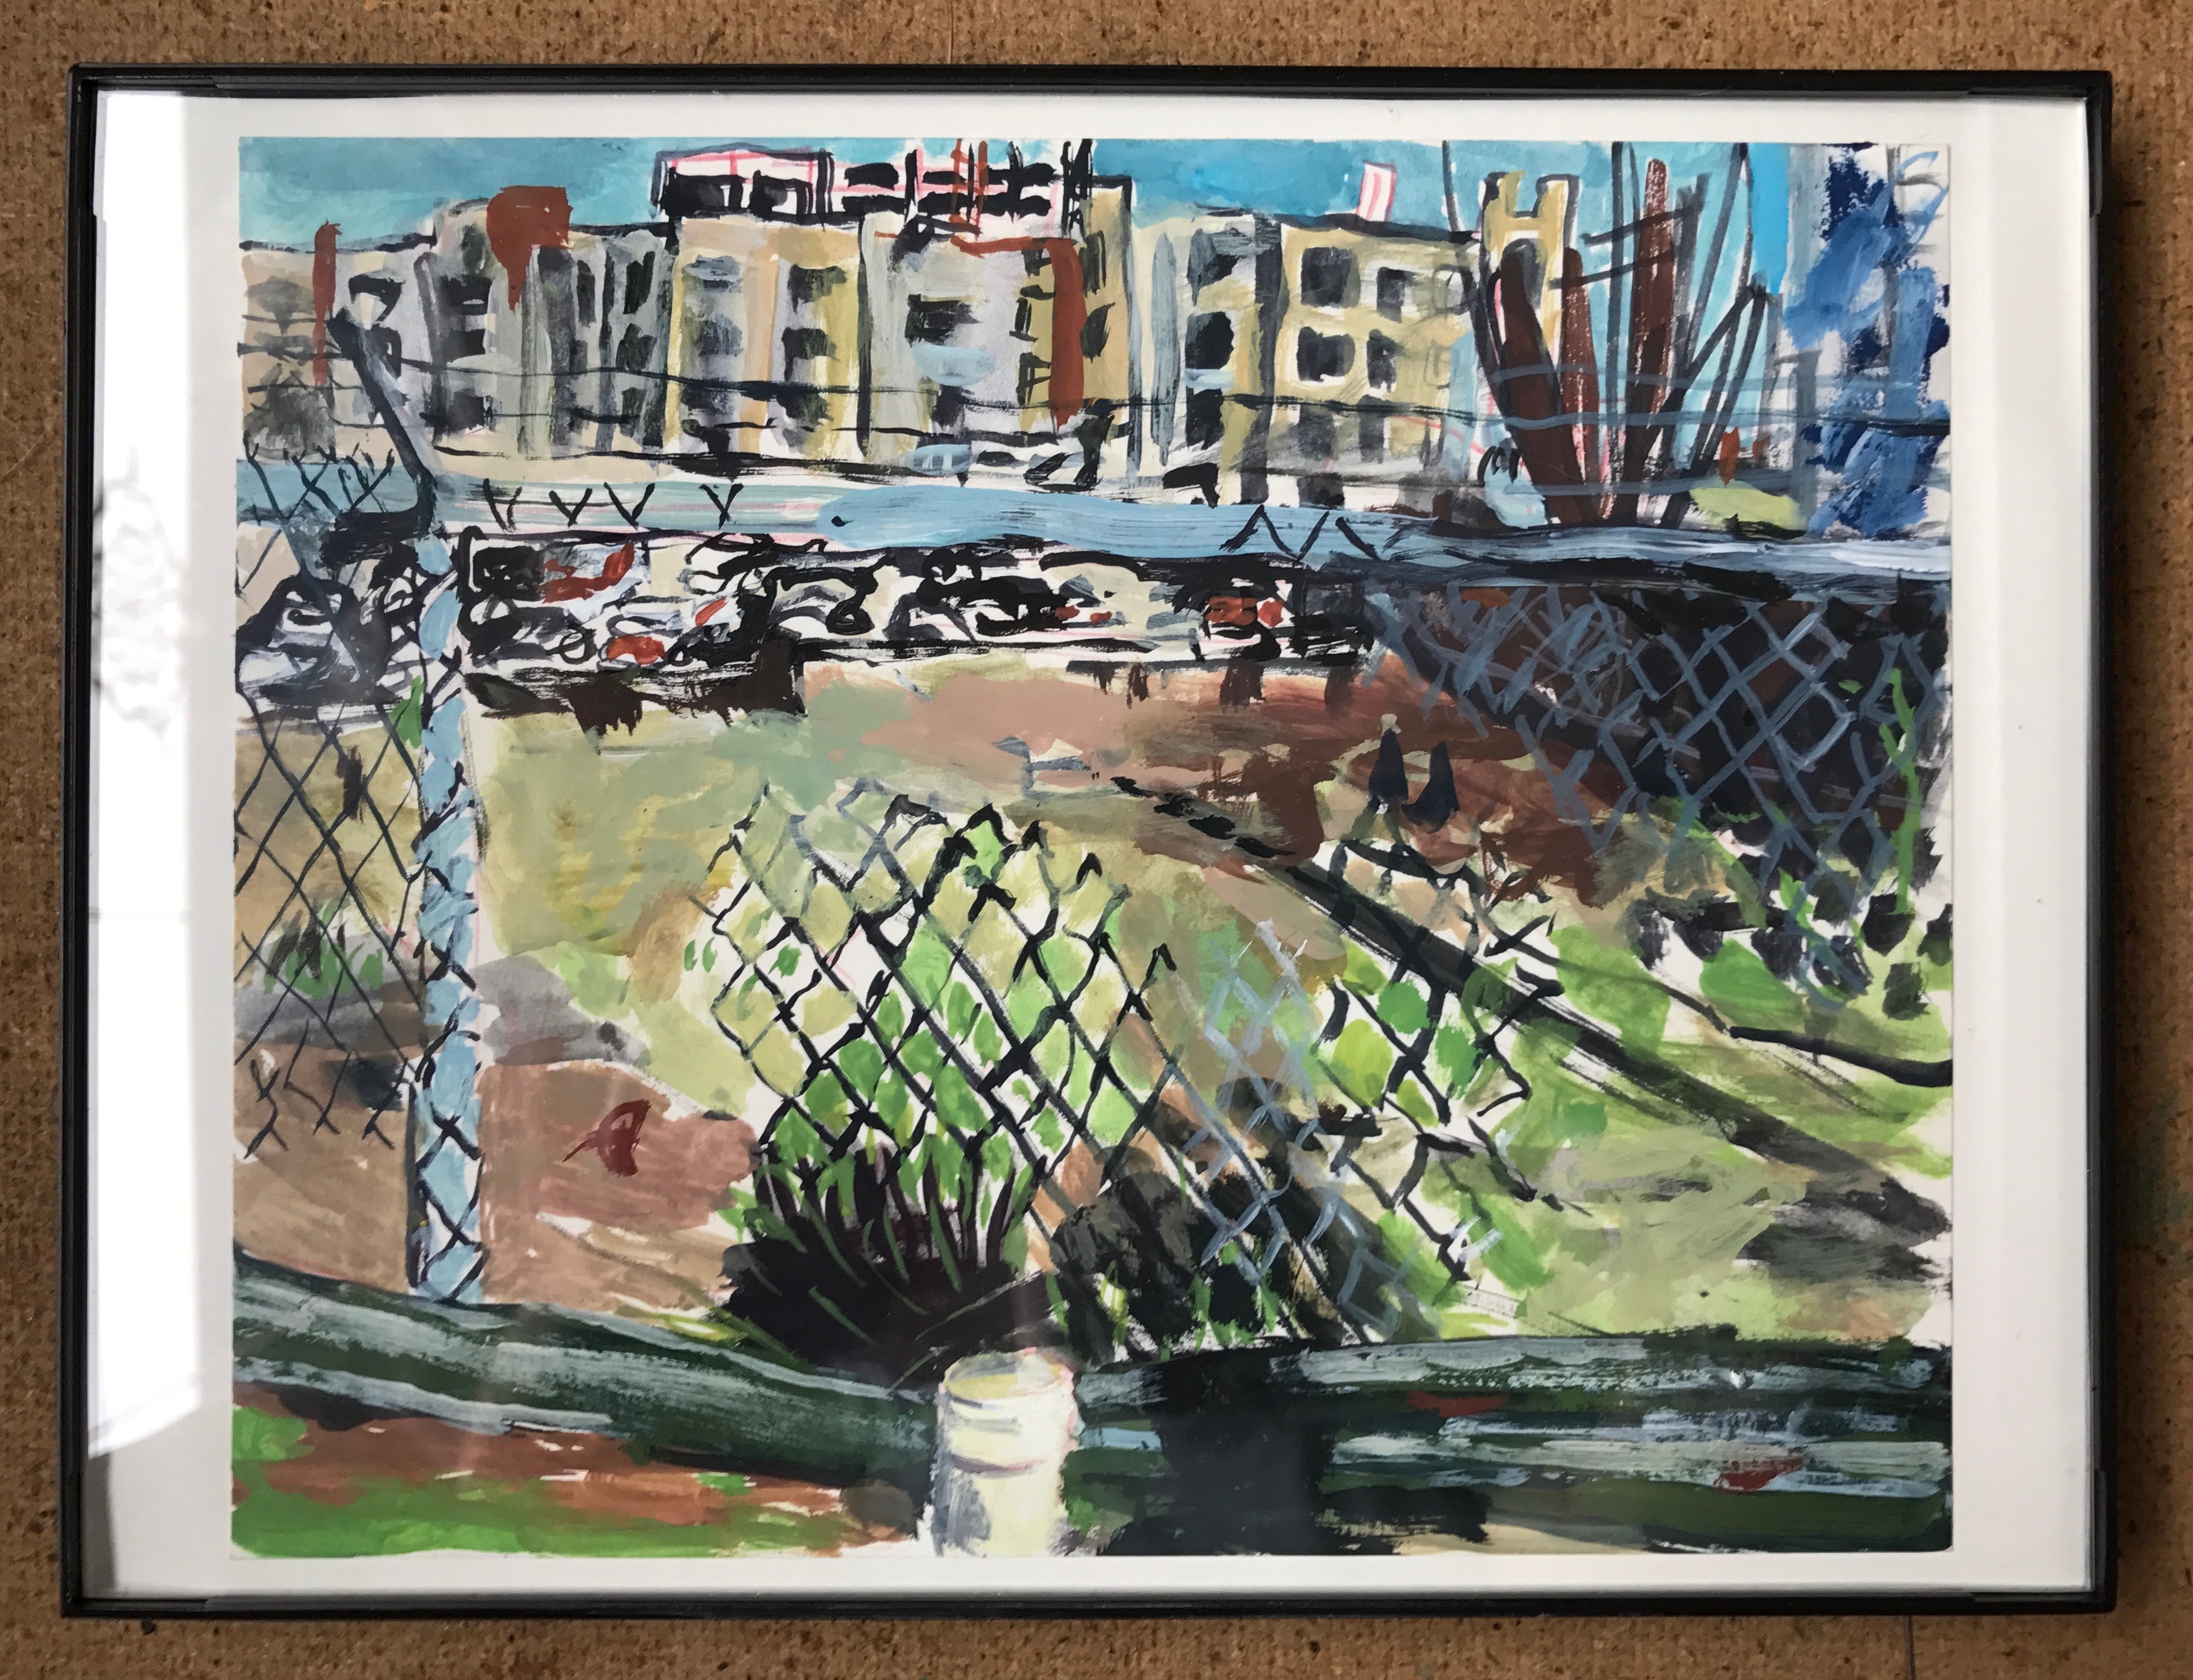 Jessica Clay, Dig Site 2: 12th Avenue, gouache on paper, 5”x7”, 2016 (from studio visit)